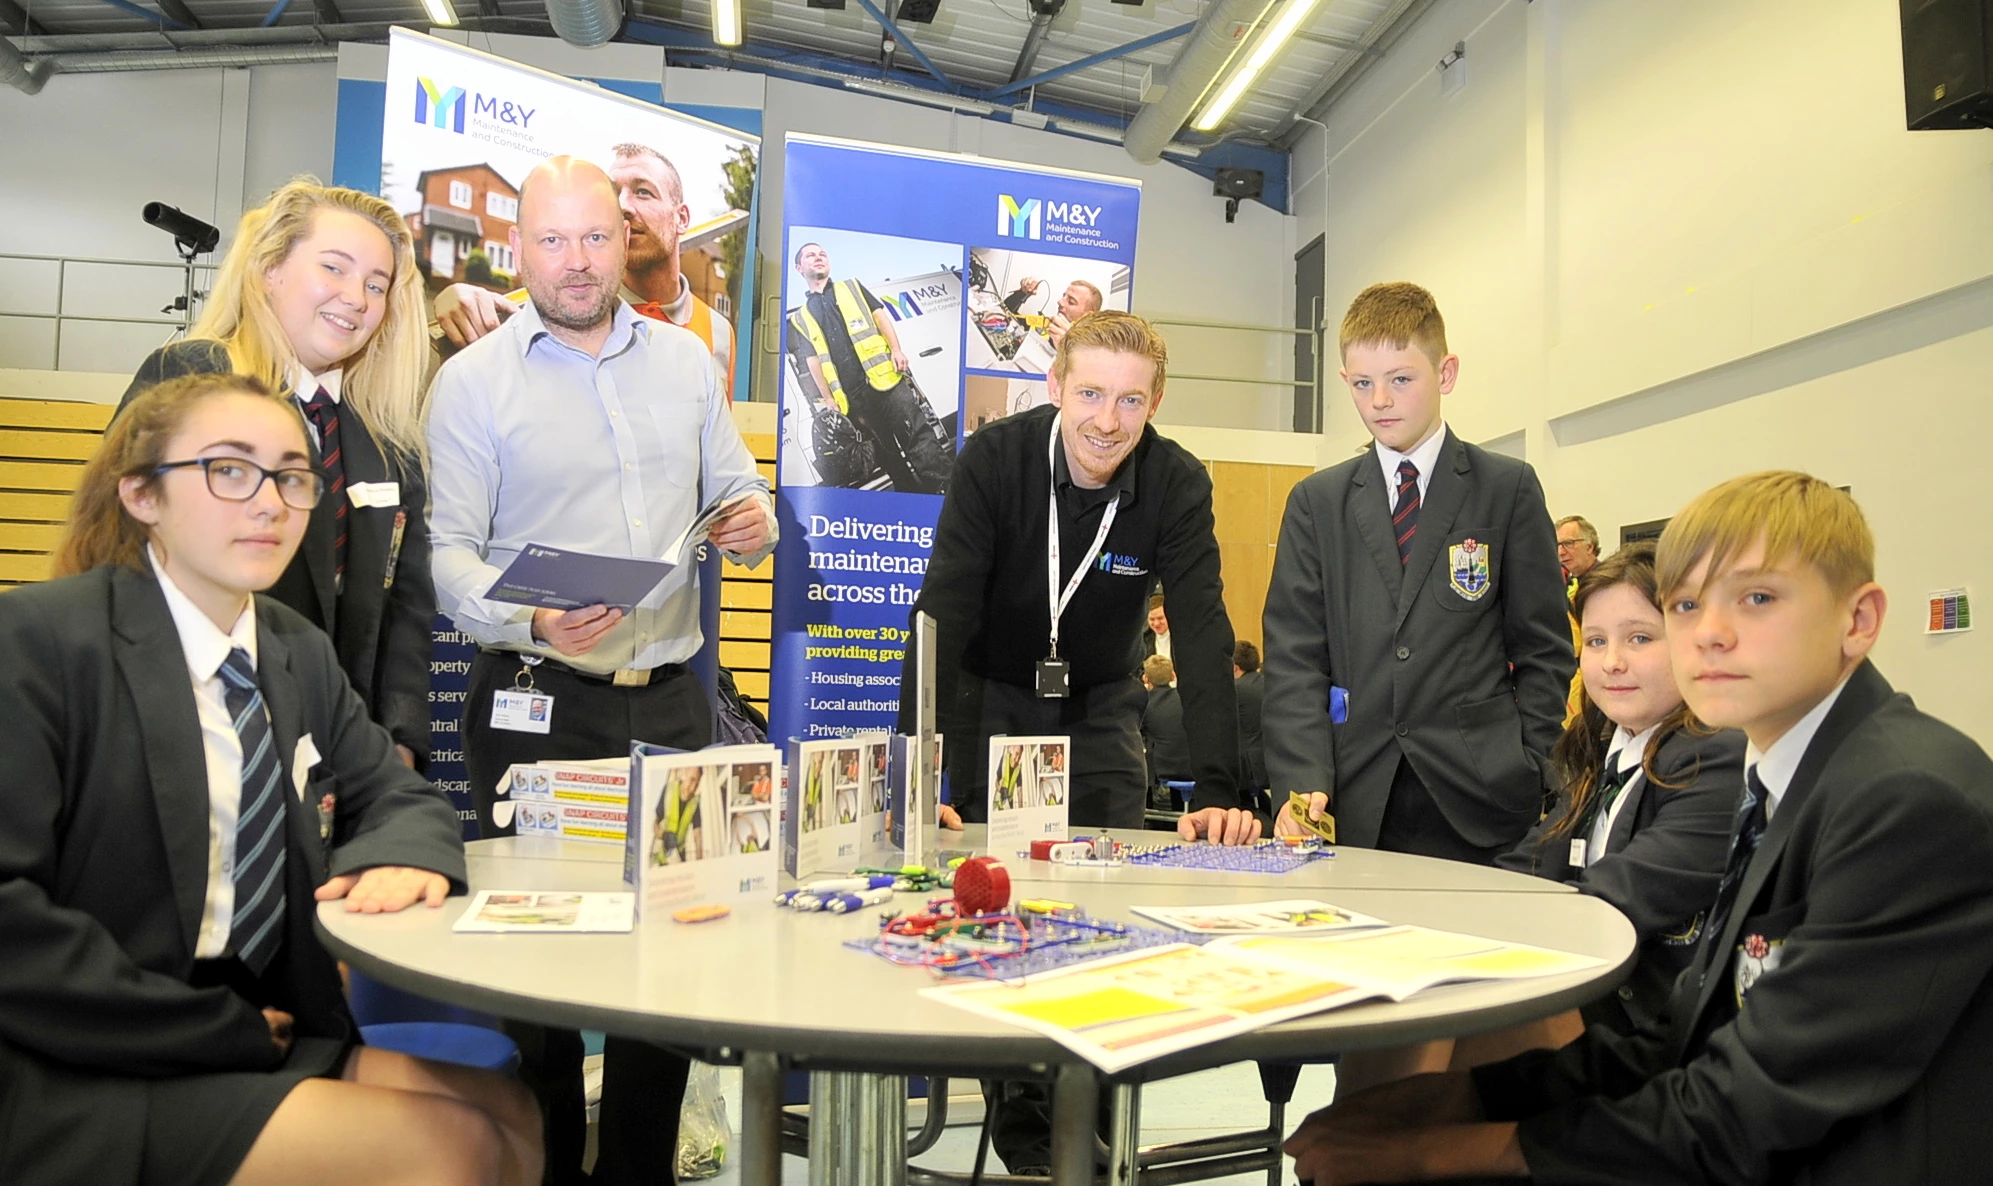 Fleetwood Pupils with M&Y Maintenance and Construction